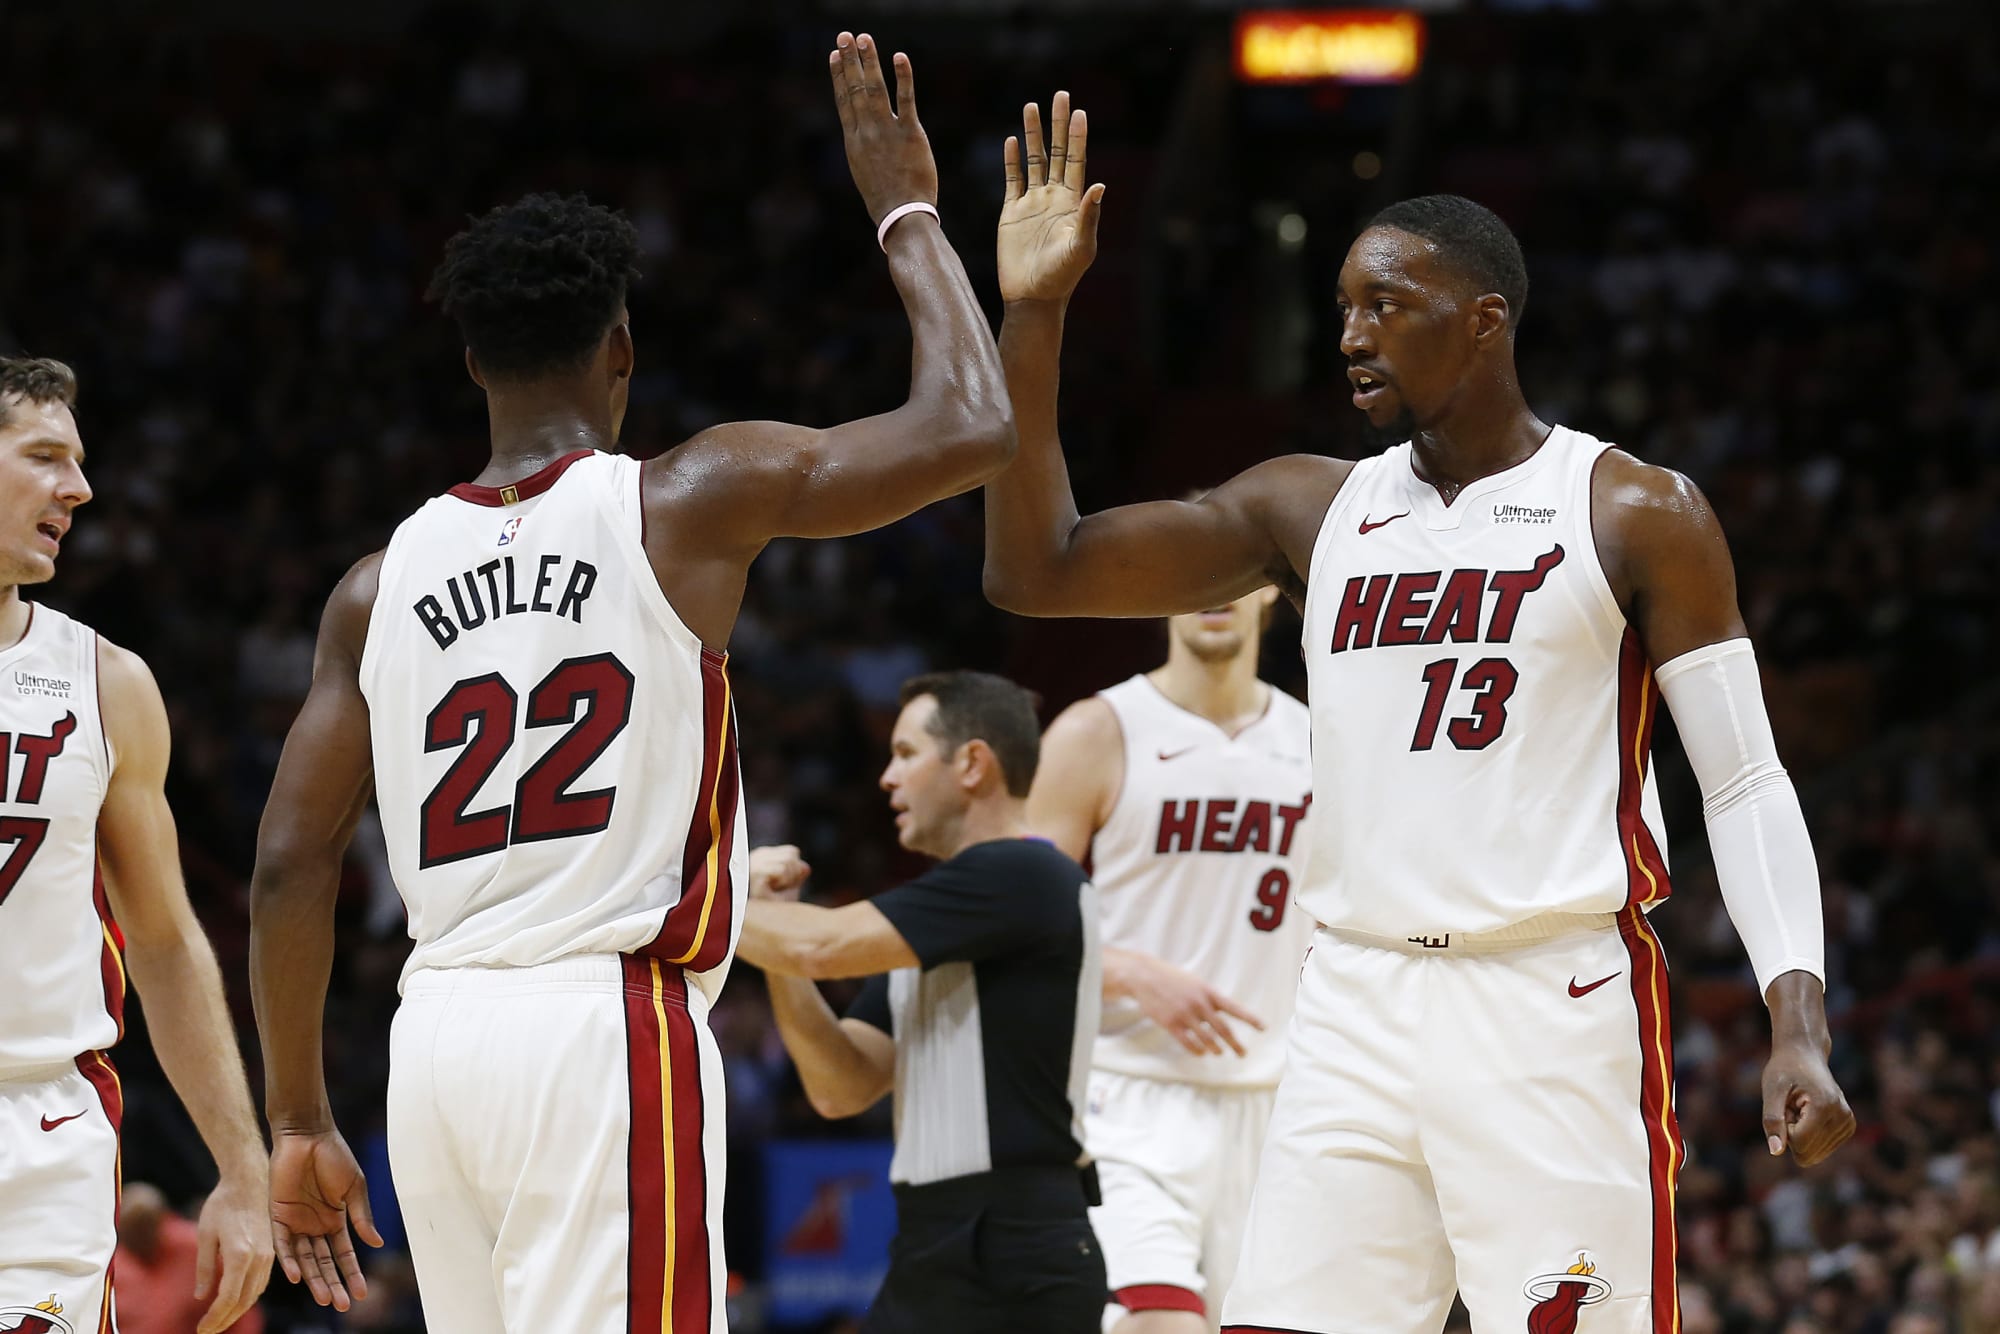 Miami Heat The Athletic lists Butler, Adebayo as top 20 players